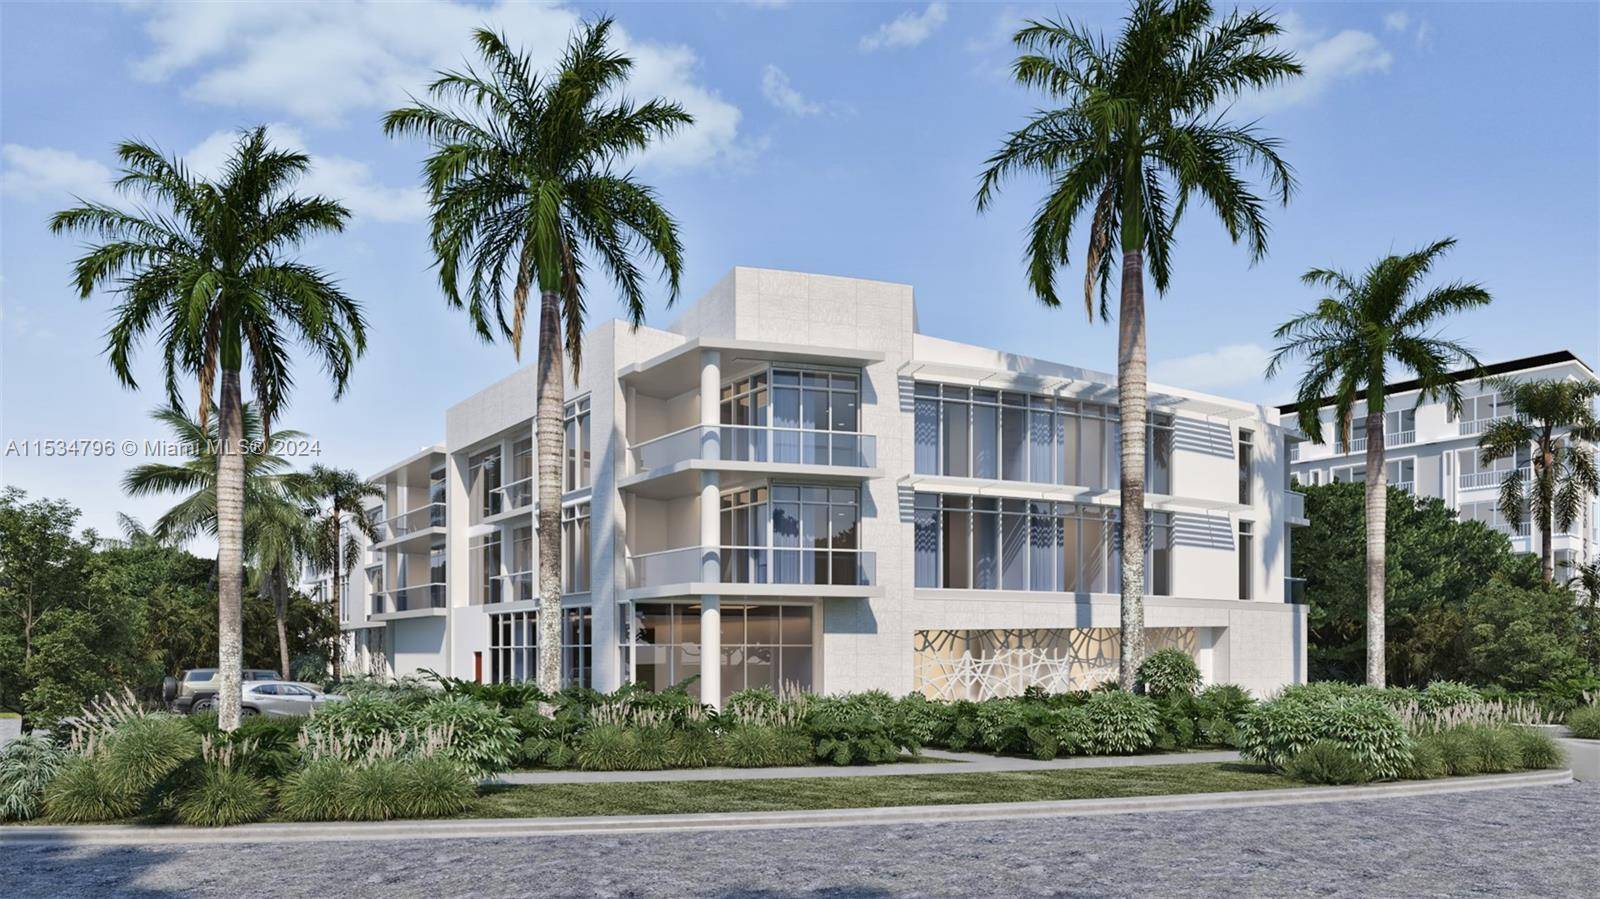 Marina del Río Residences, a new boutique waterfront development consisting of 10 beautifully appointed apartments in the prime Coral Ridge neighborhood.